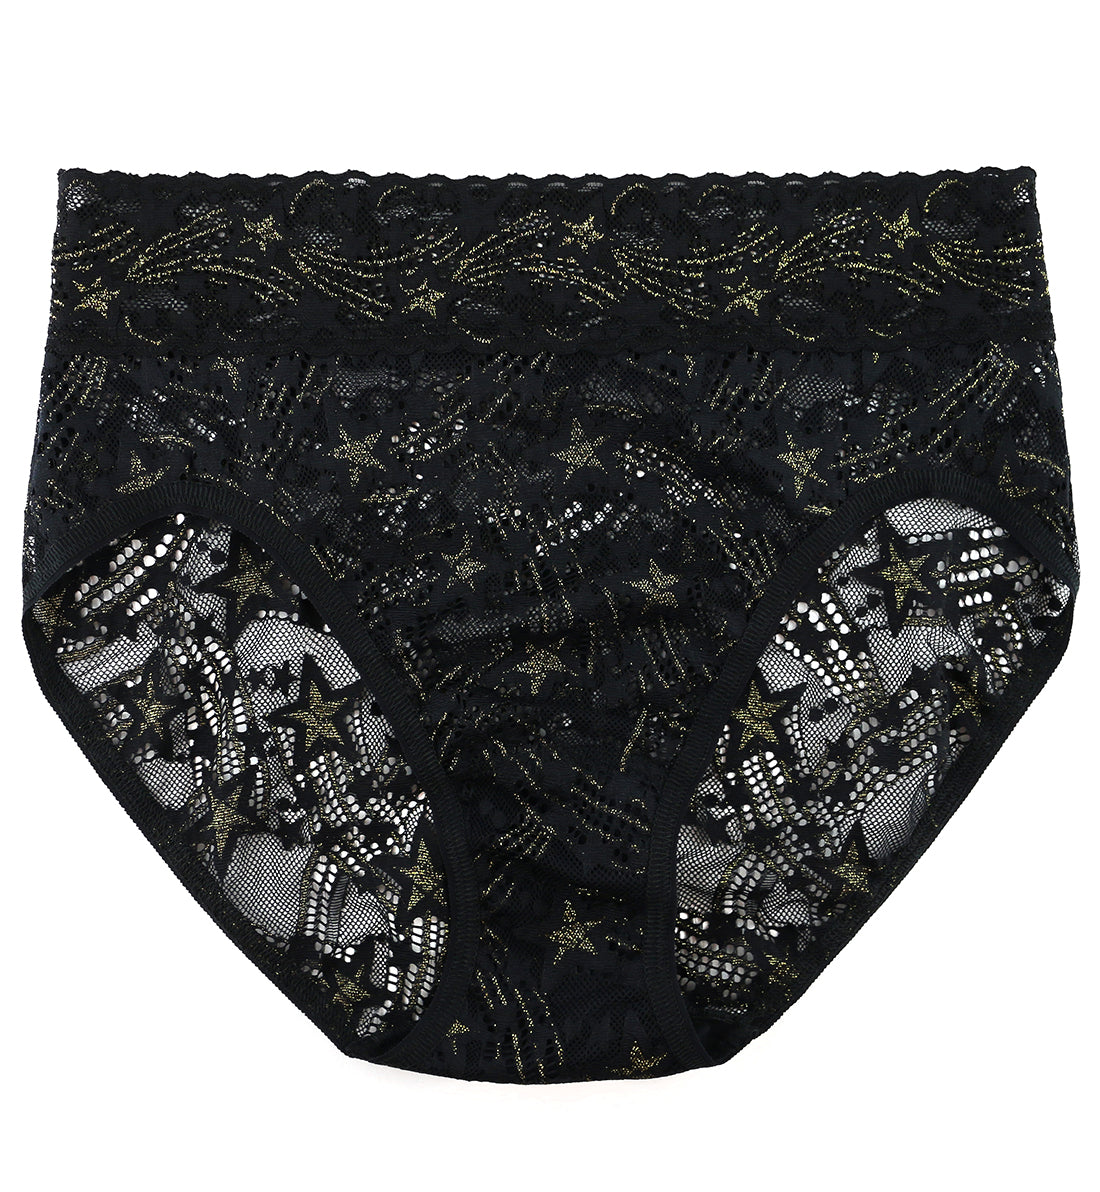 Hanky Panky Night Fever French Brief (152466),Small,Black/Gold - Black/Gold,Small